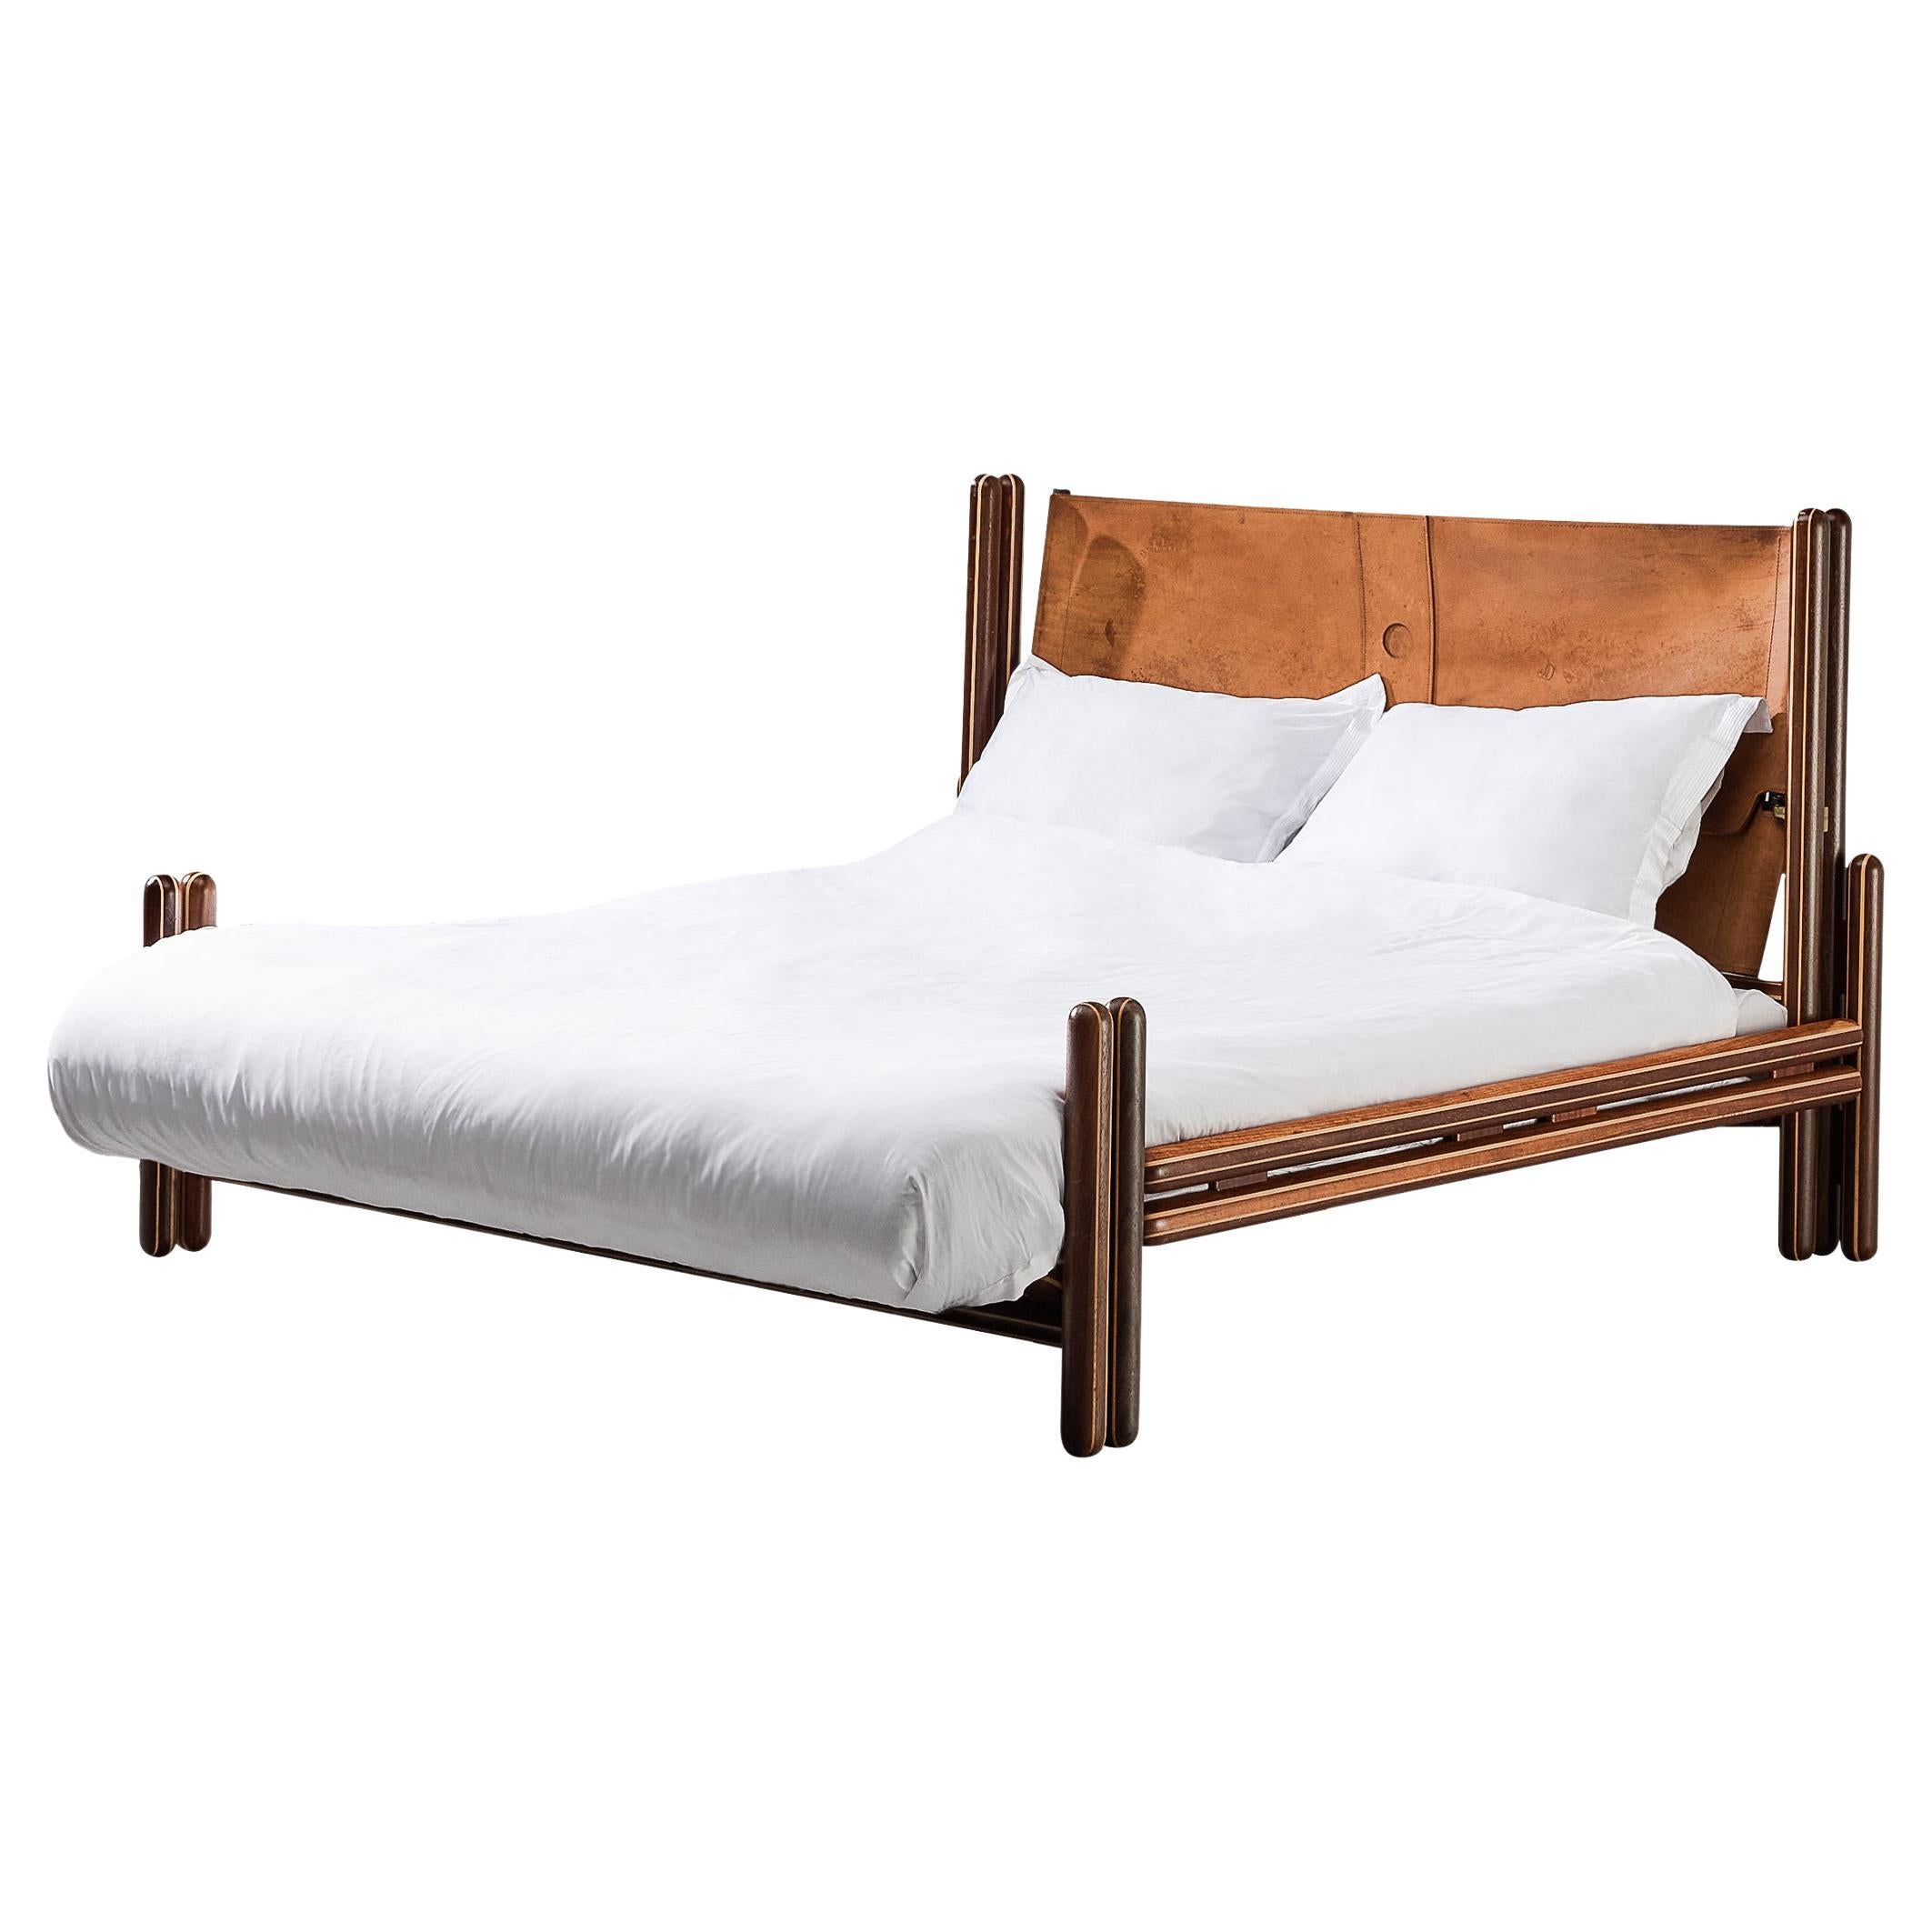 Carlo Scarpa for Simon Gavina 'Toledo' Queen Bed in Padouk and Leather 